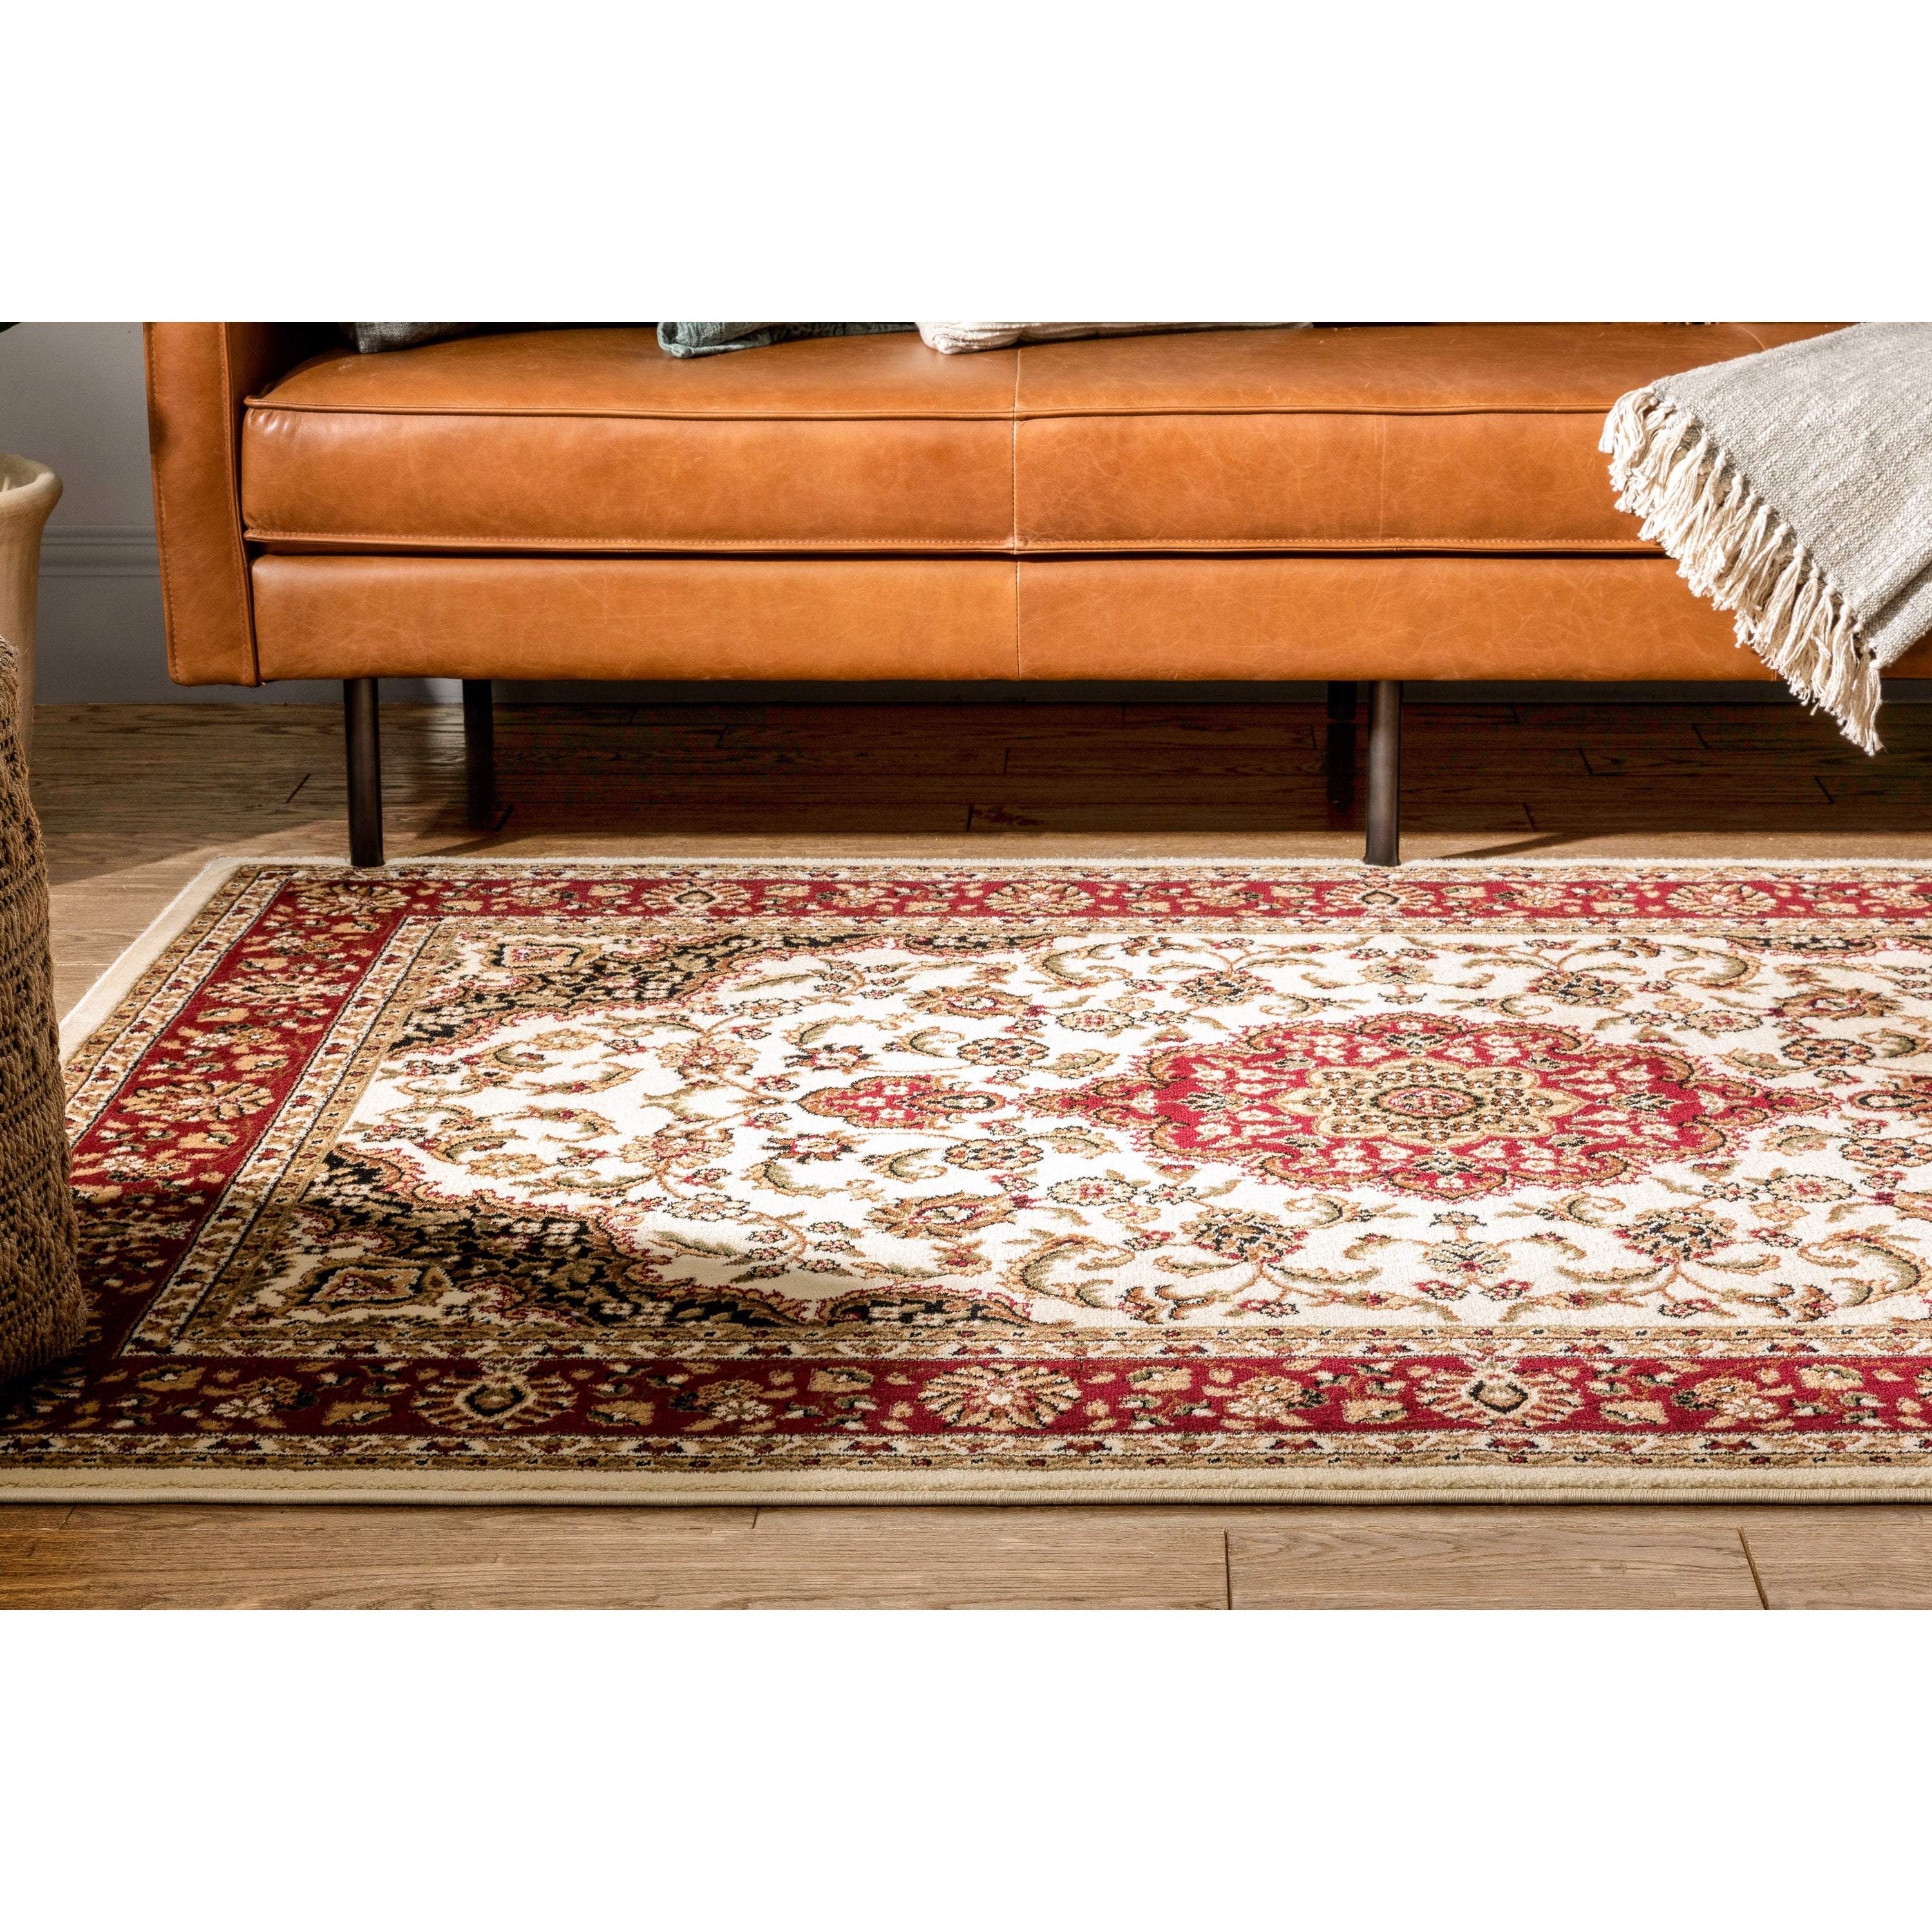 St. Croix Navy Traditions Kashan Wool Rug - 6' x 6' Round